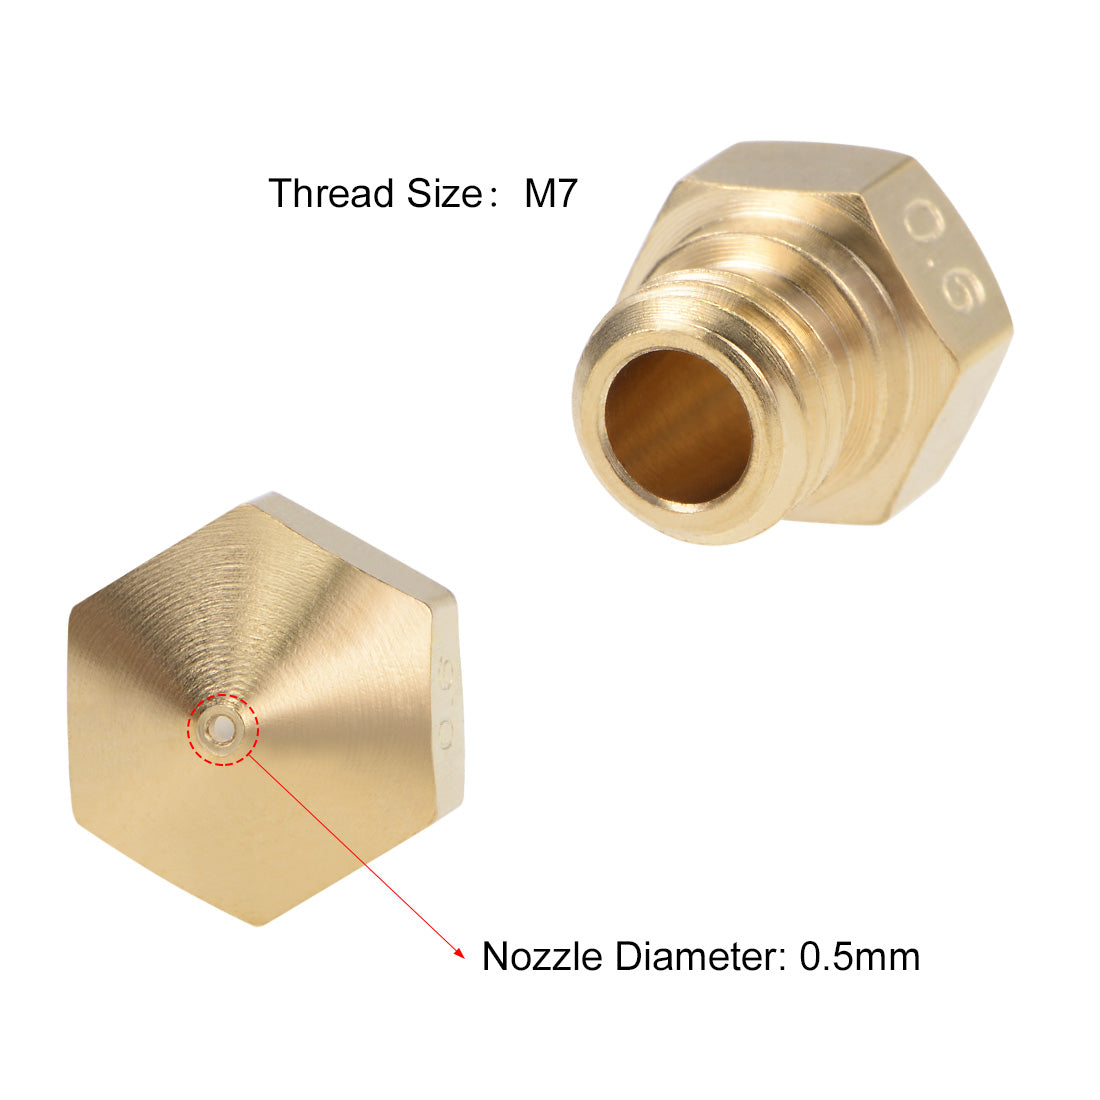 uxcell Uxcell 0.6mm 3D Printer Nozzle Head M7 for MK10 1.75mm Extruder Print, Brass 10pcs